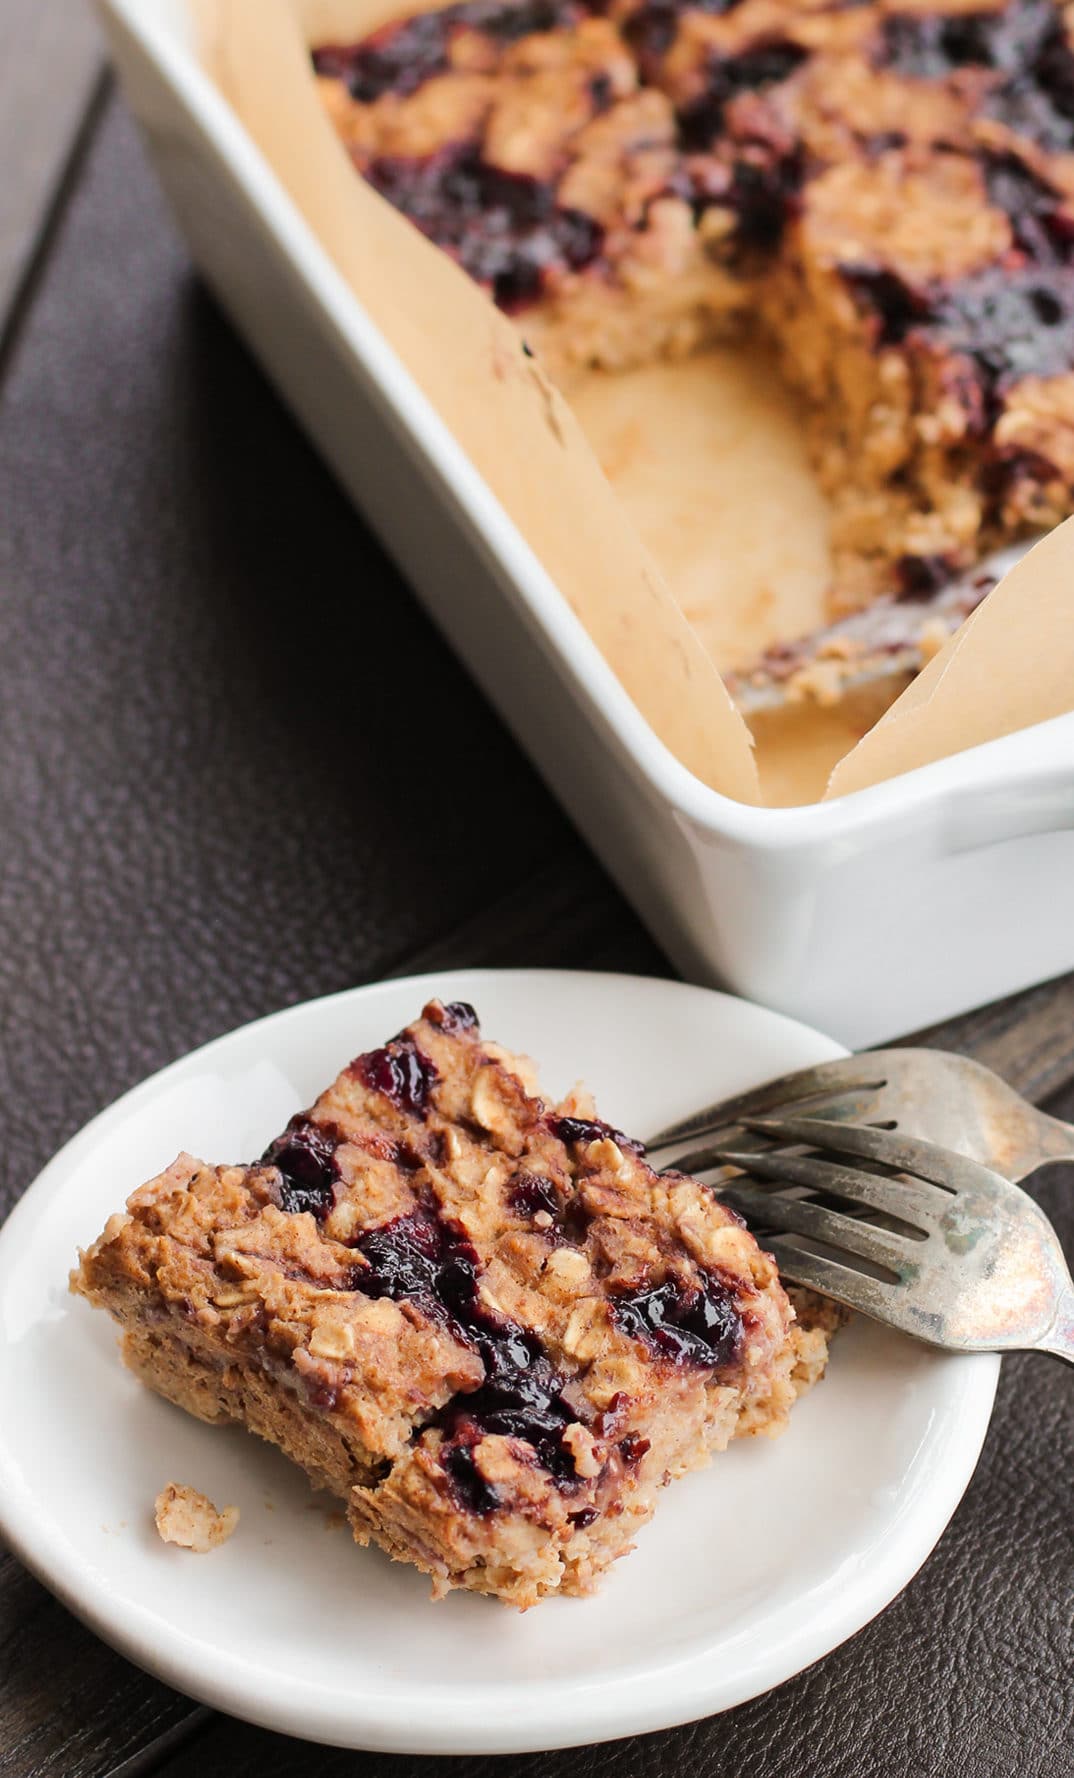 Healthy Peanut Butter and Jelly Baked Oatmeal (refined sugar free, high protein, high fiber, gluten free, vegan) - Healthy Dessert Recipes at Desserts with Benefits